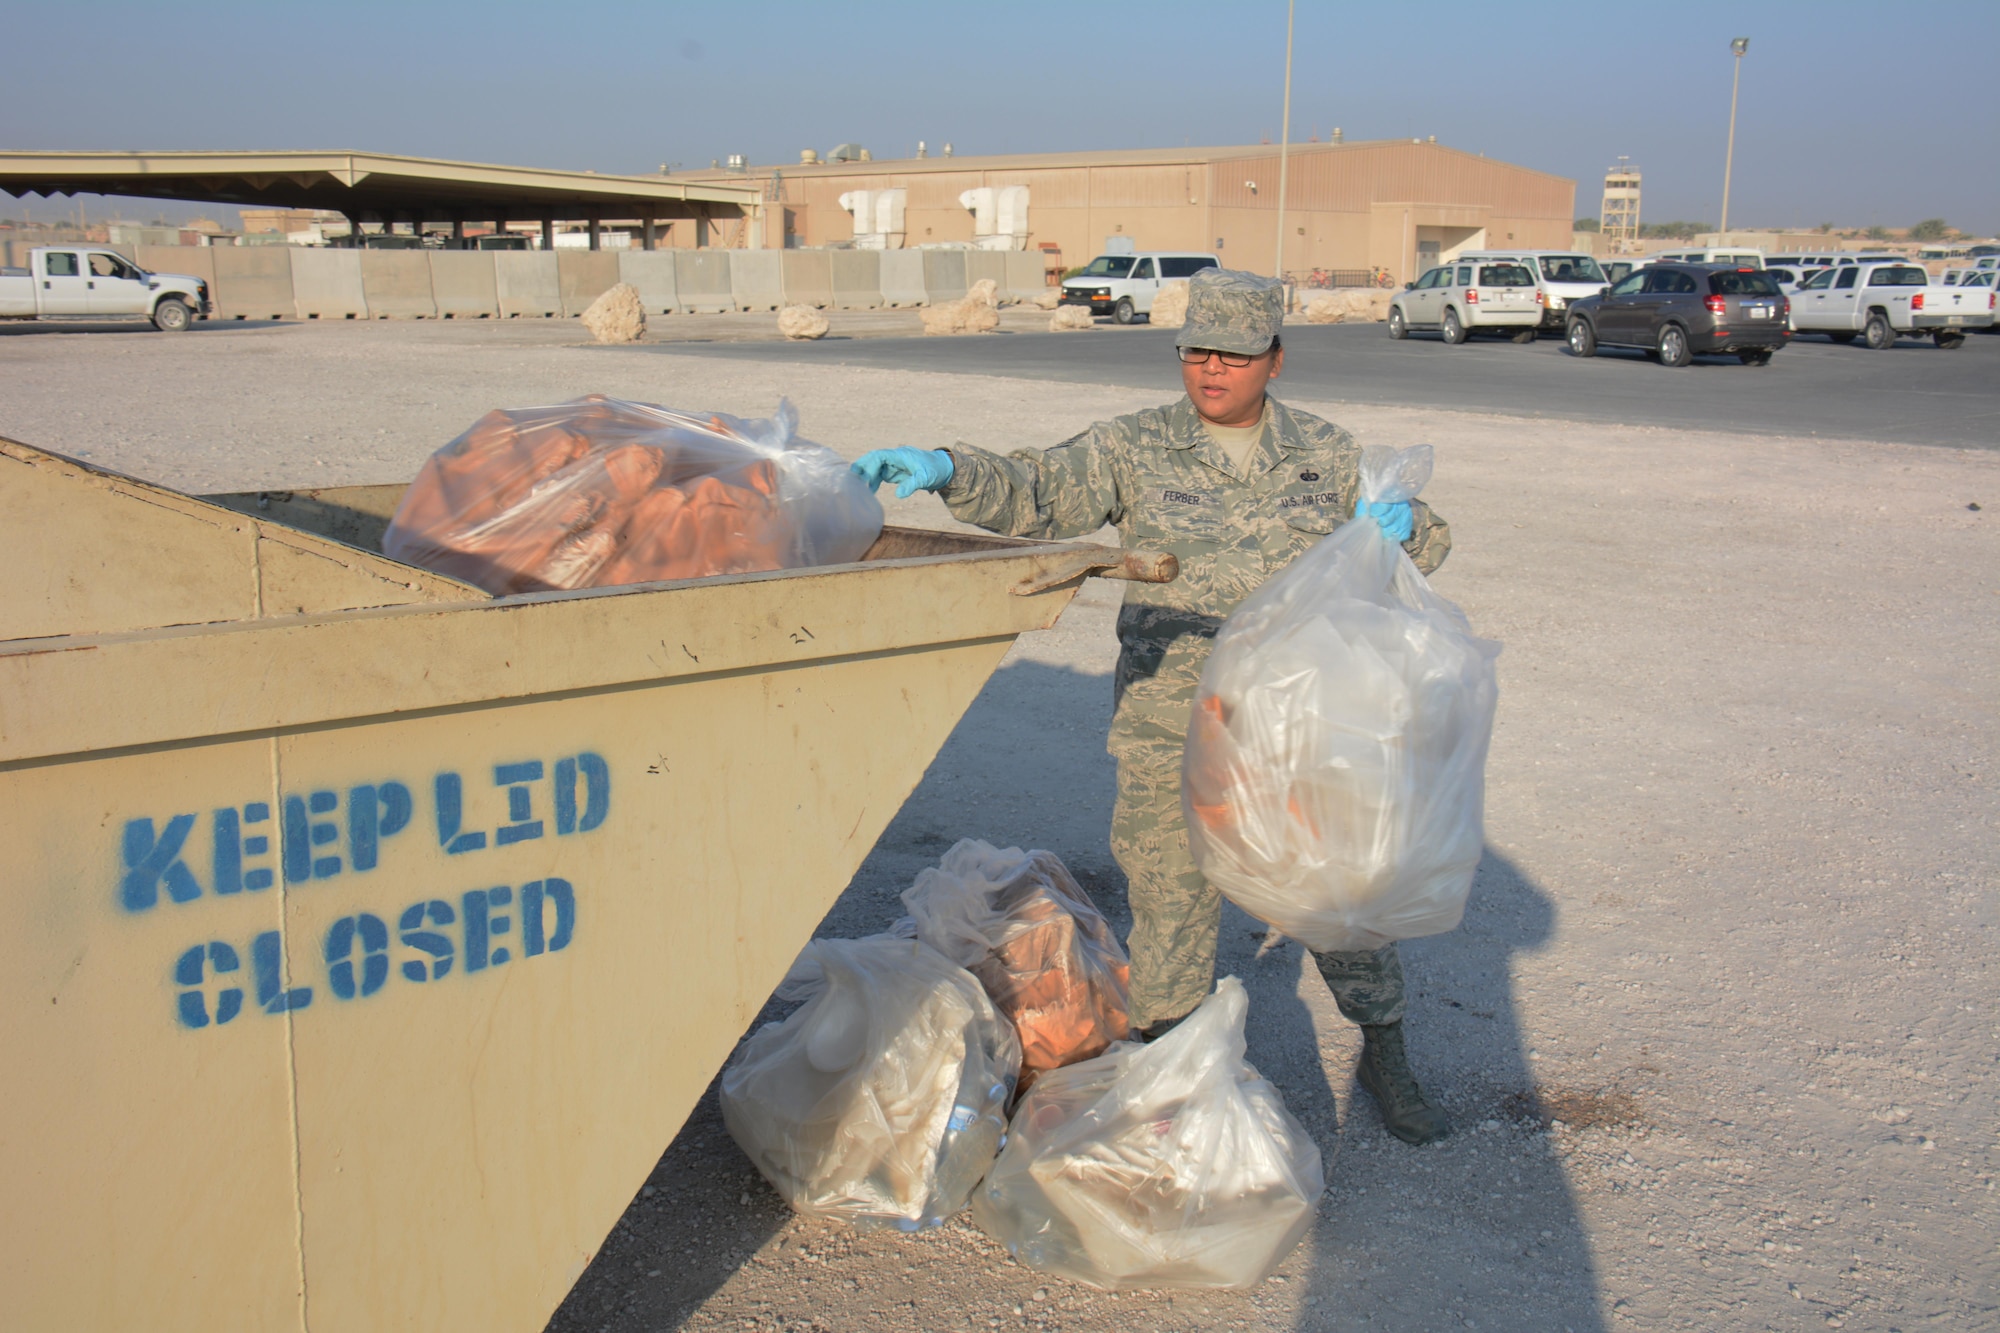 Tech. Sgt. Jocelyn Ferber, U.S. Air Force’s Central Command's Protocol non-commissioned officer in charge, throws one of five bags of trash into a dumpster during an Operation Community clean-up event at Al Udeid Air Base, Qatar Dec. 1. Ferber, a native of Joint Base Lewis-McChord, Washington, said she enjoyed helping clean up the base. More than 70 volunteers took part in the event collecting 130 bags of trash in one hour. (U.S. Air Force photo by Tech. Sgt. James Hodgman/Released)